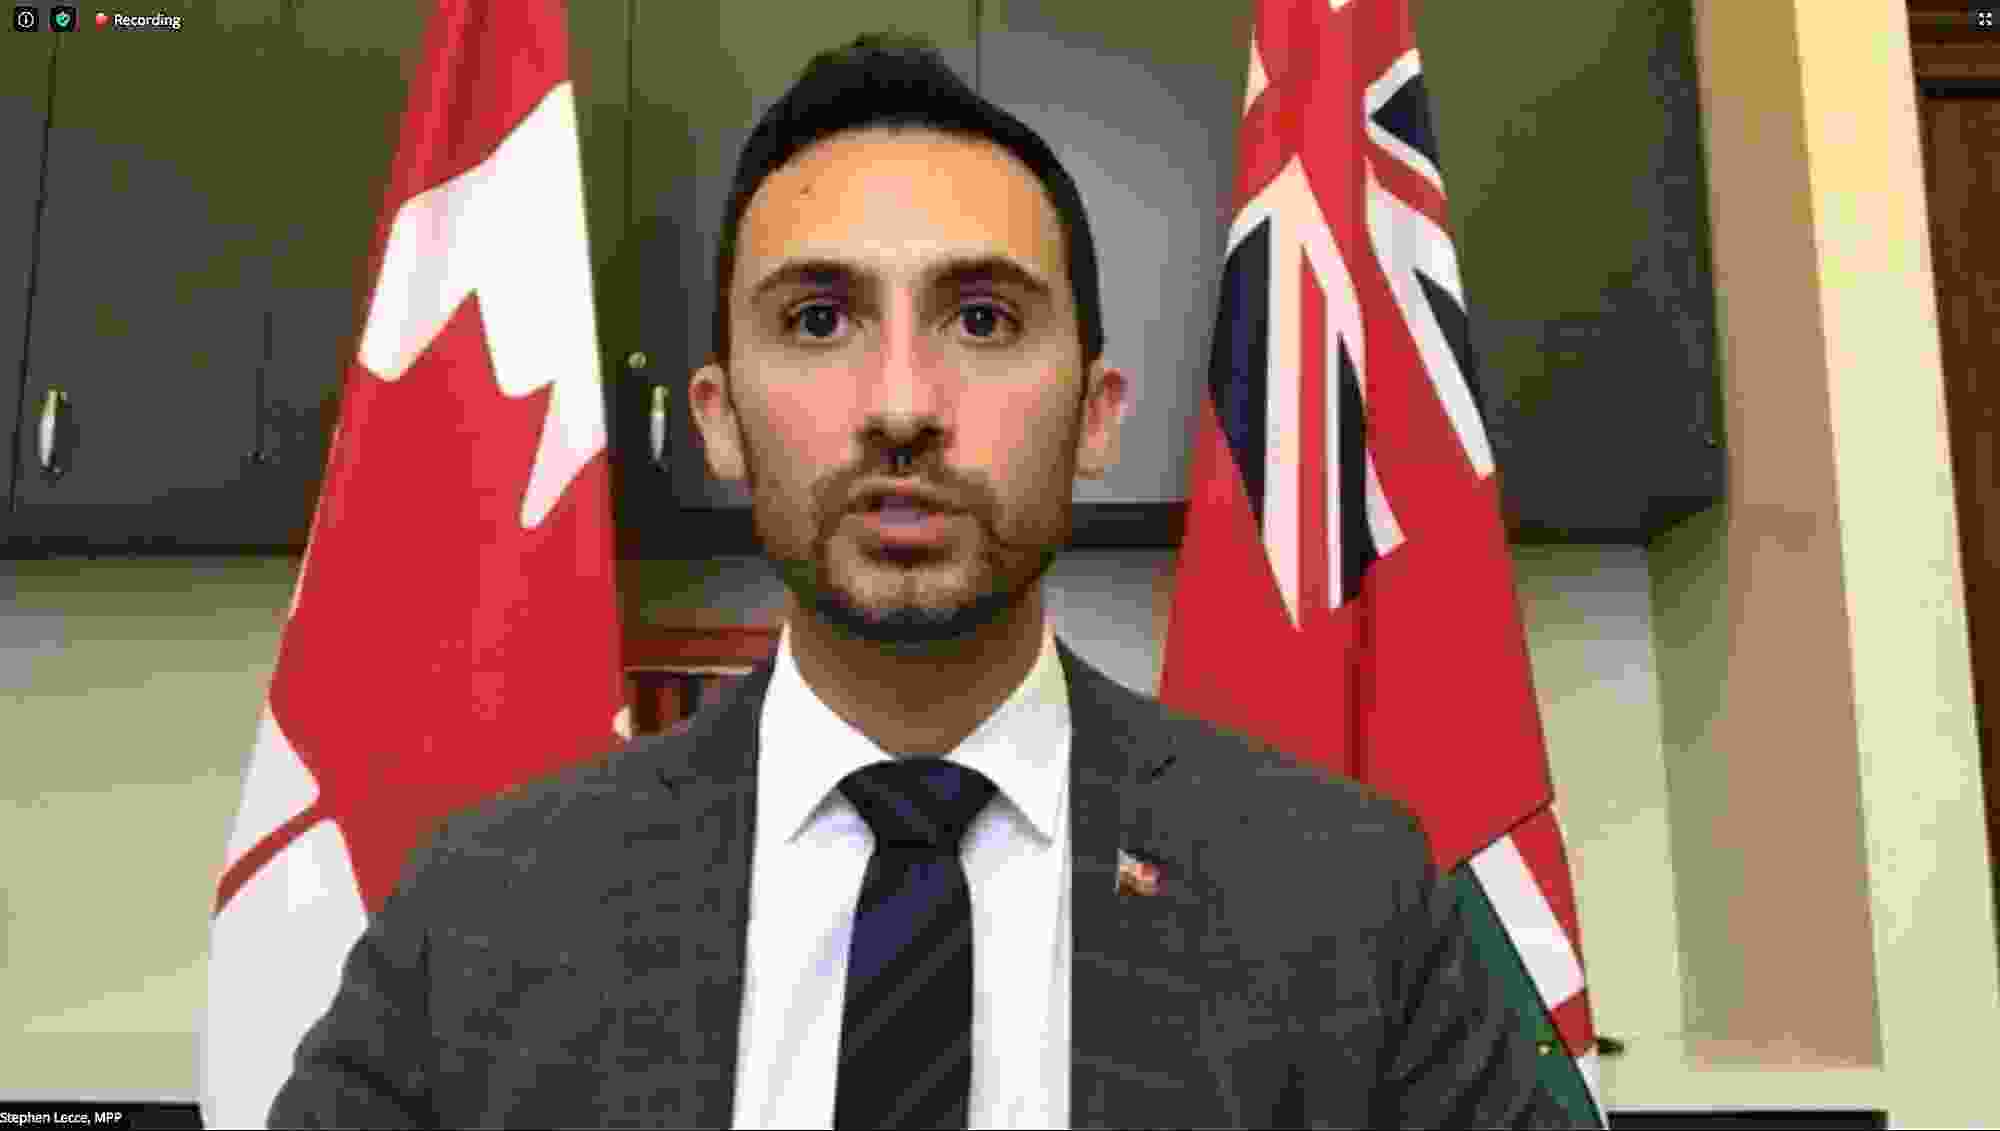 Ontario Education Minister Stephen Lecce plans to deliver a “more normal, full-time, in-person learning experience.”